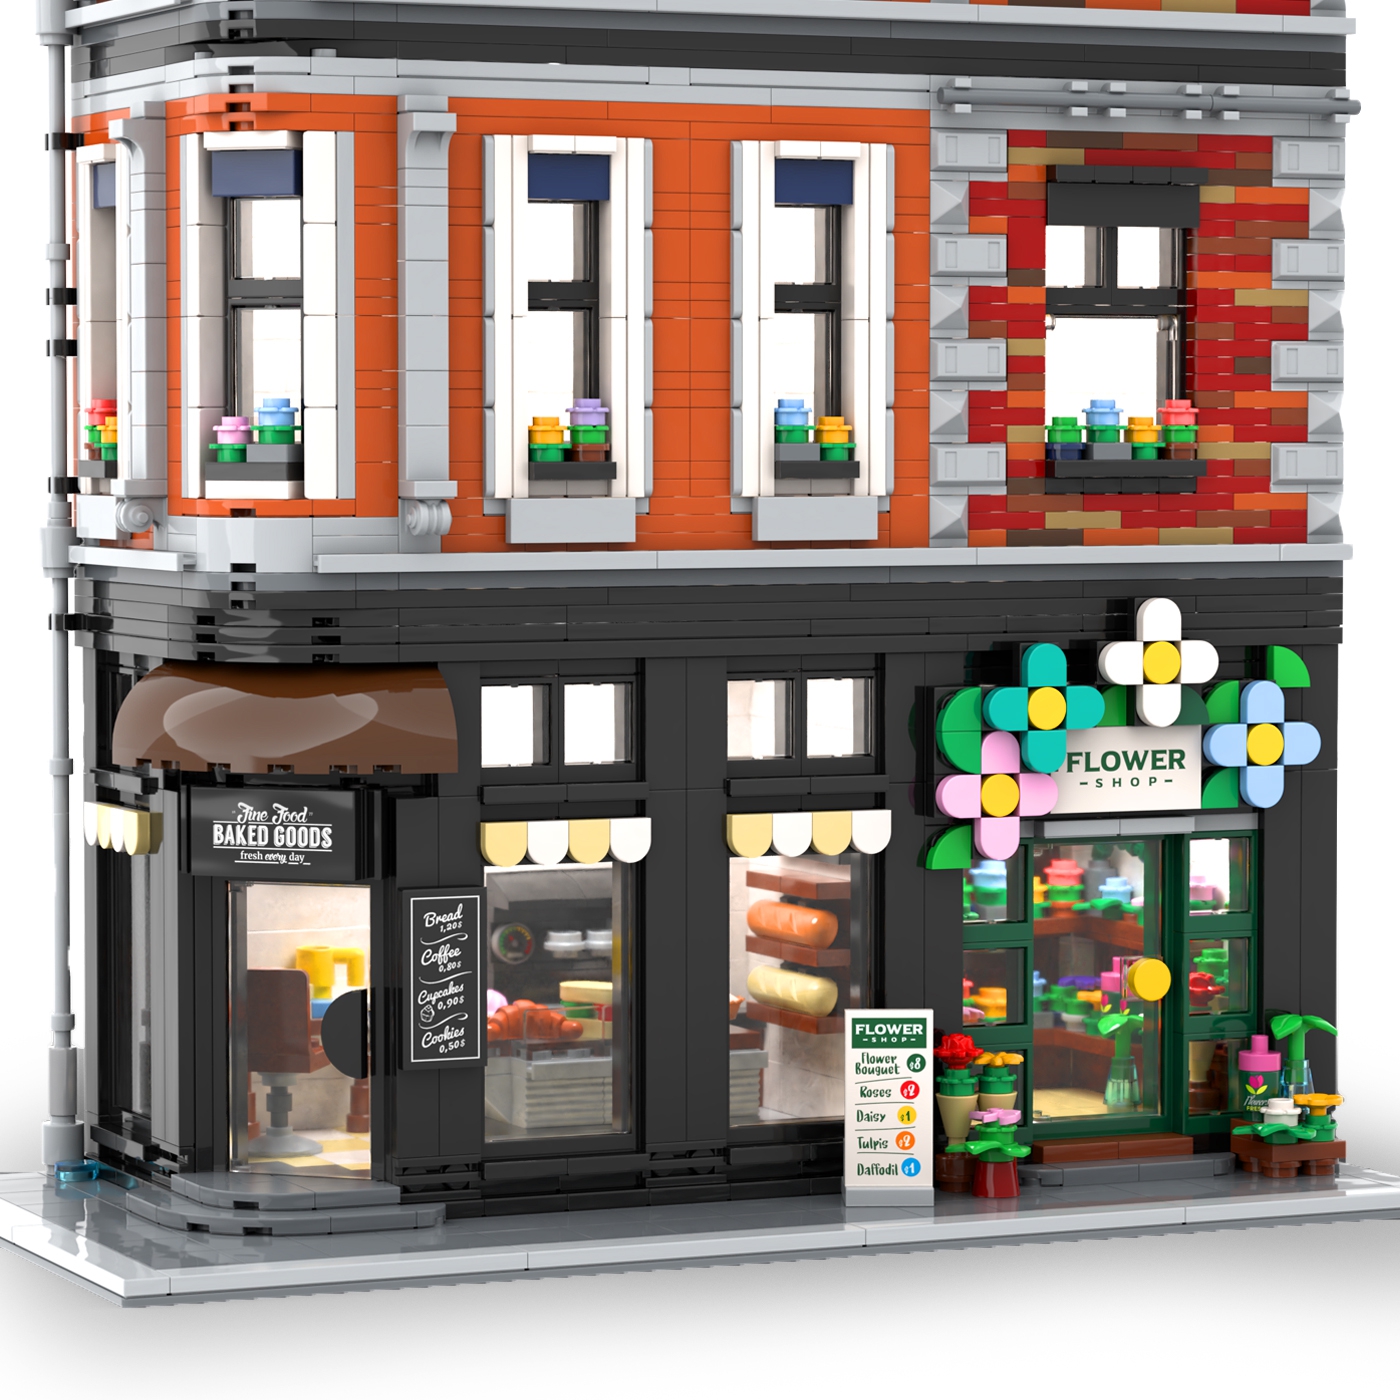 Bakery and Flower Shop